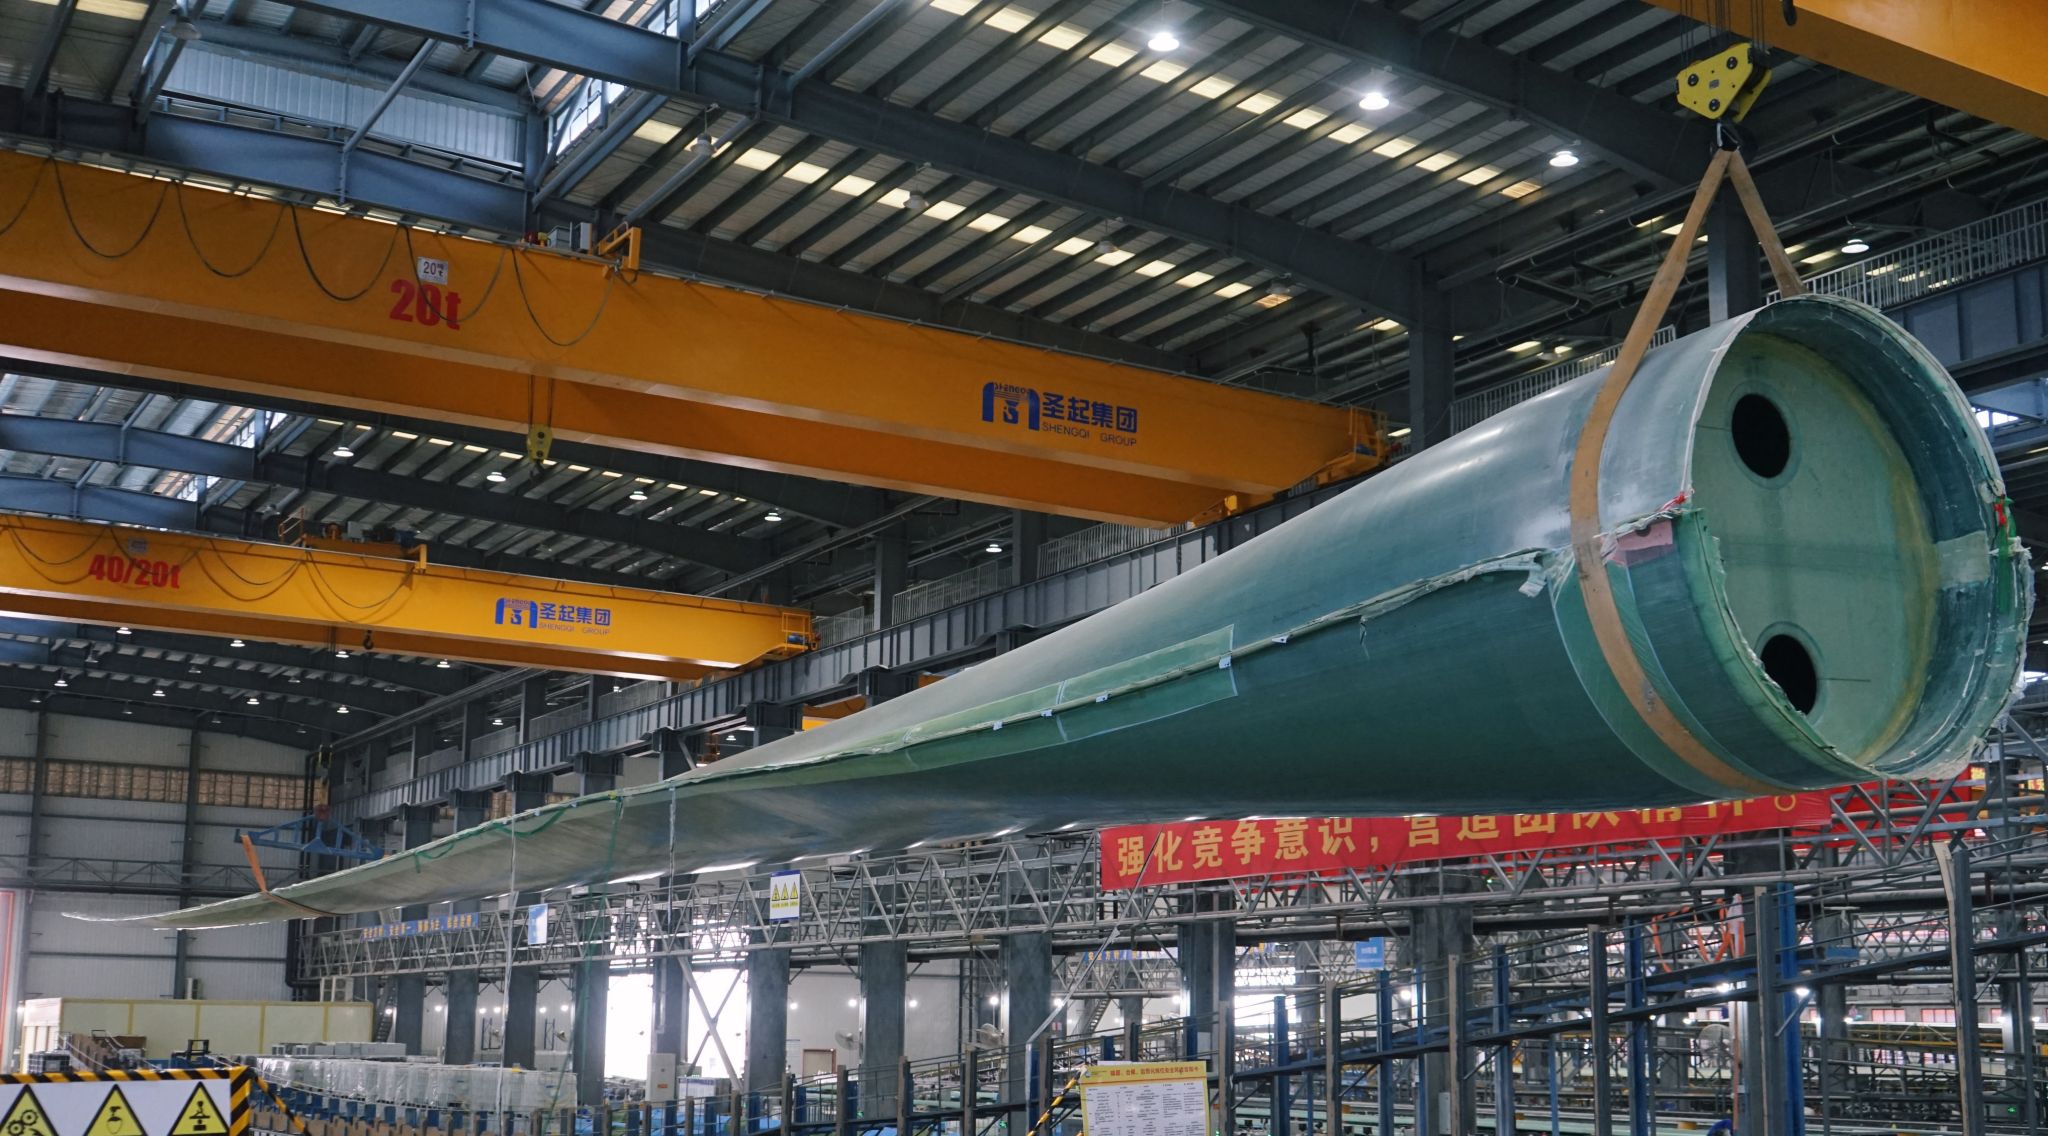 A photo of the first MySE 11-99A1 blade for the MySE 11MM-203 wind turbine rolled off the production line at the Guangdong Shanwei offshore blade production facility.